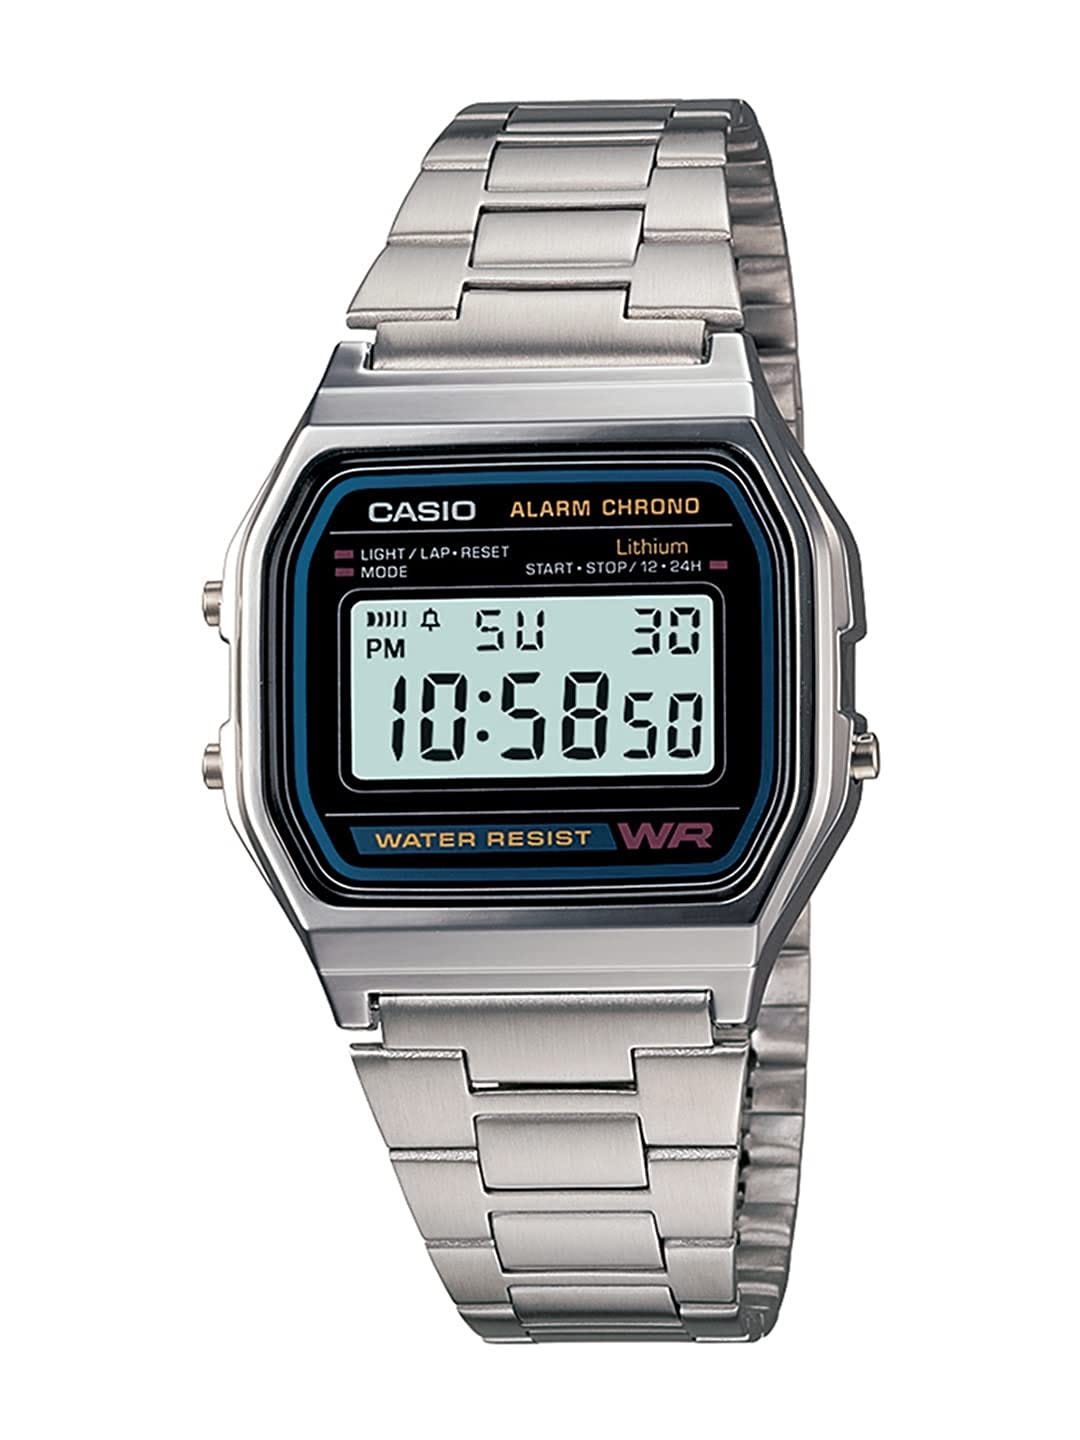 Casio A-158WA-1Q: A Timeless Classic in the Vintage Series Digital Men's  Watch Collection | by Vipul Ghumman | Medium